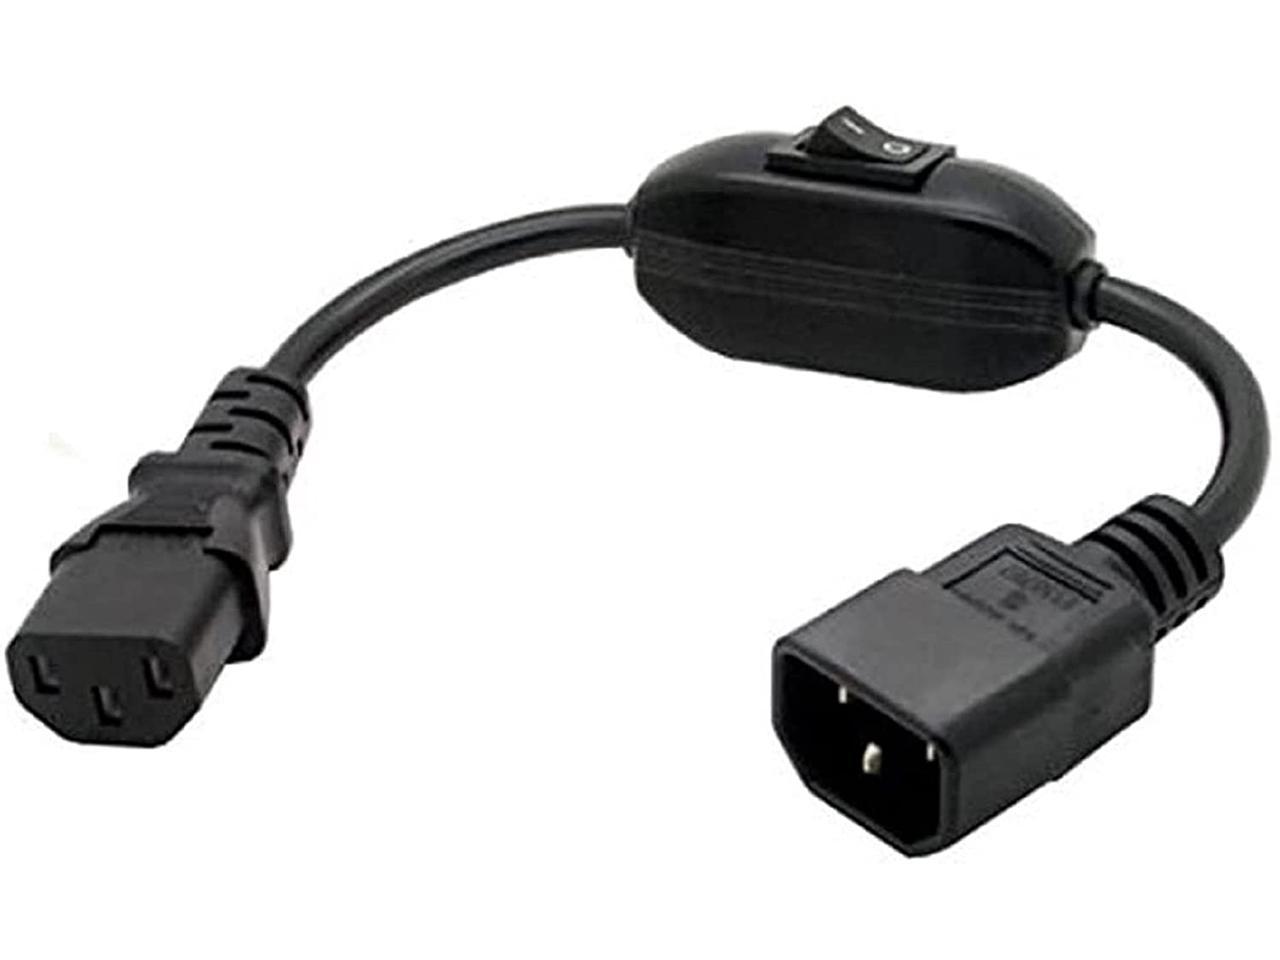 Iec-320-C14 to Iec-320-C13 6-Ft. 16awg Computer Power Extension Cord 13a